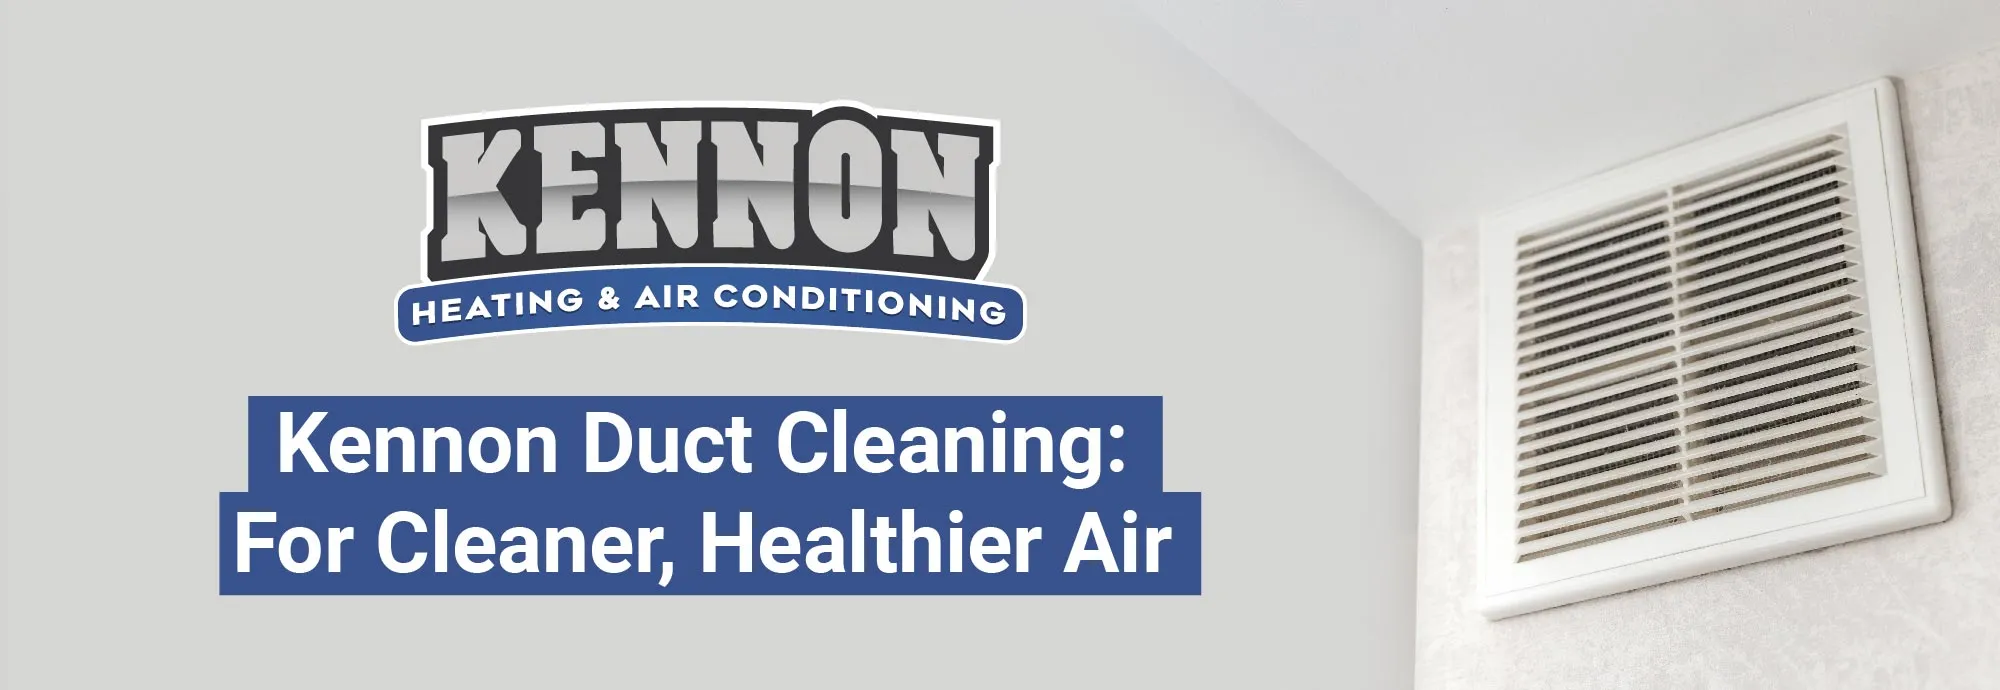 Kennon Heating and Air Conditioning Duct Cleaning Services.